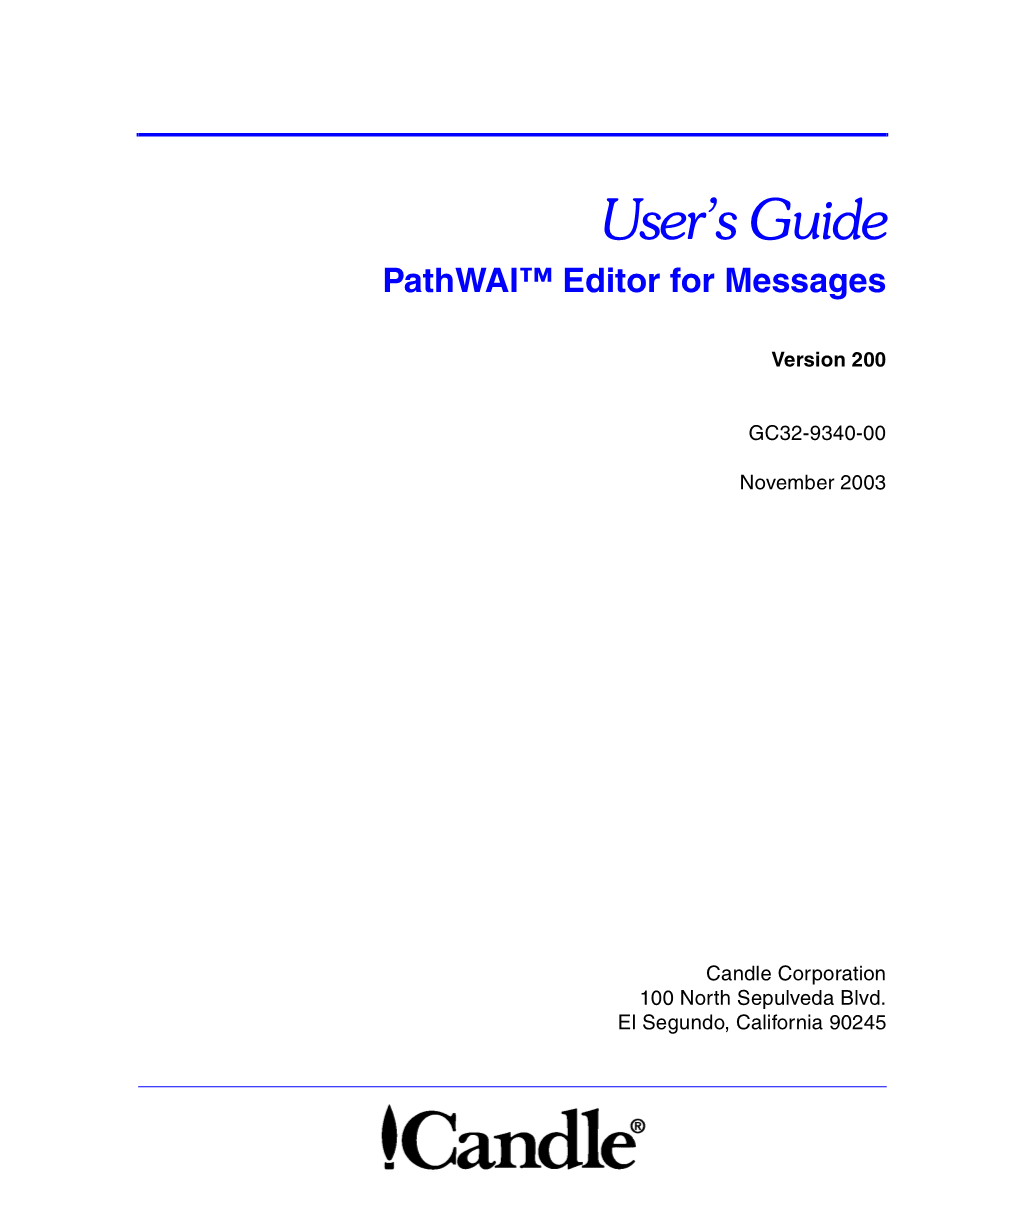 Pathwai Editor for Messages User's Guide